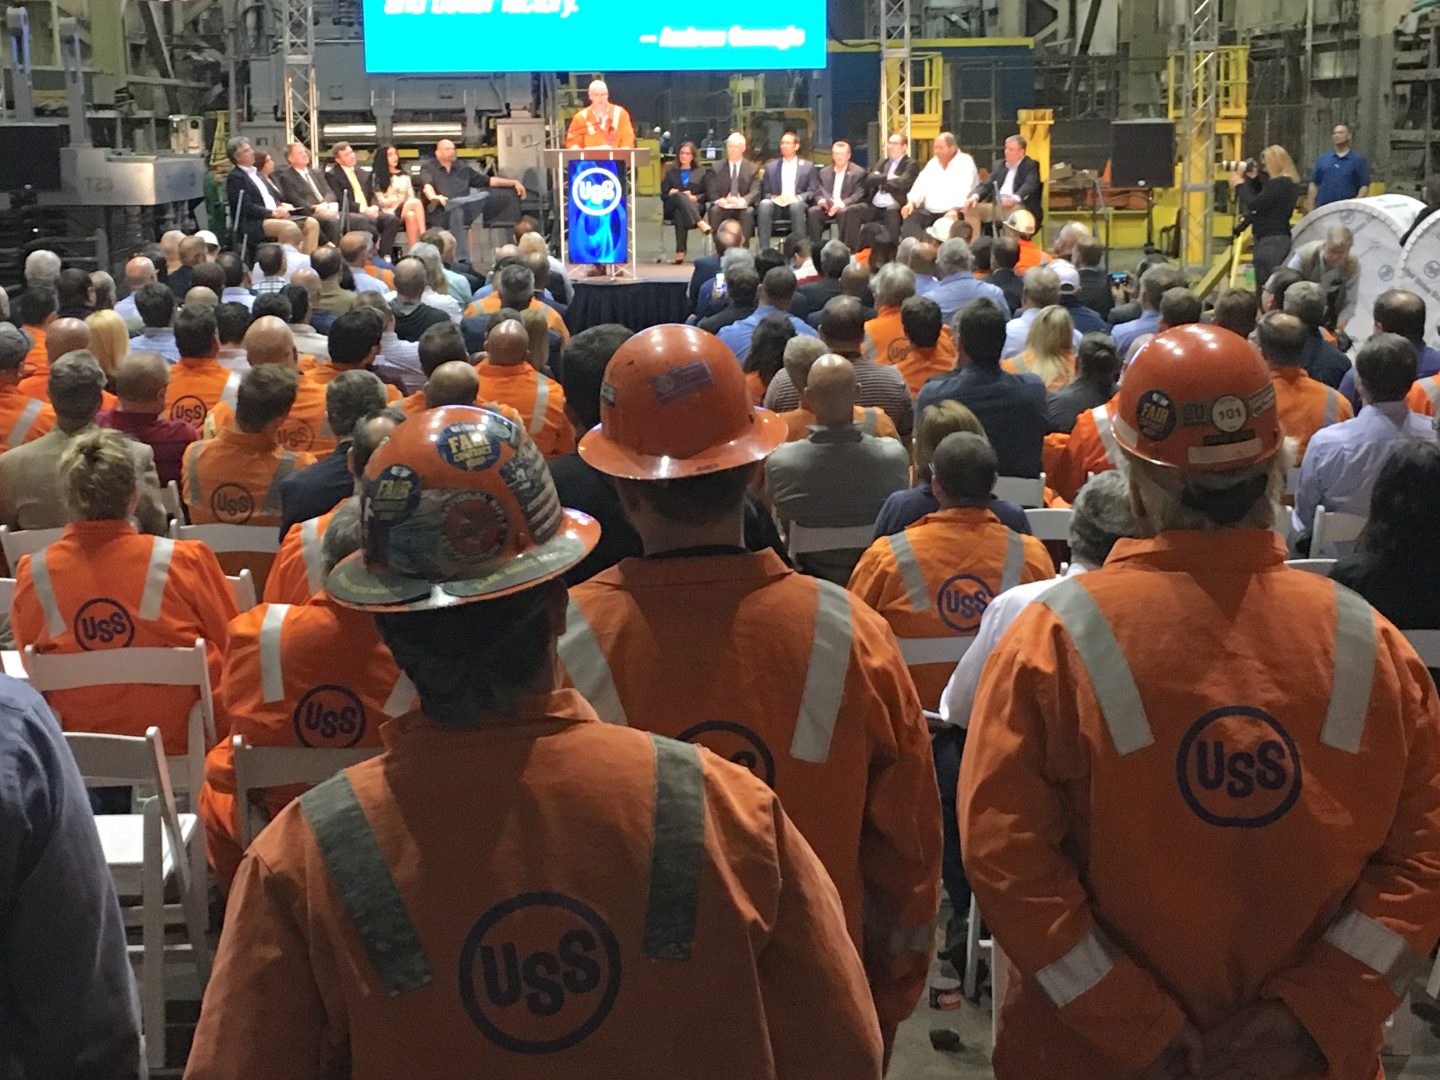 Steelworkers watch Thursday as U.S. Steel president and CEO David Burritt announces a $1-billion investment in upgrades at Clairton Coke Works and the Edgar Thomson plant near Pittsburgh.